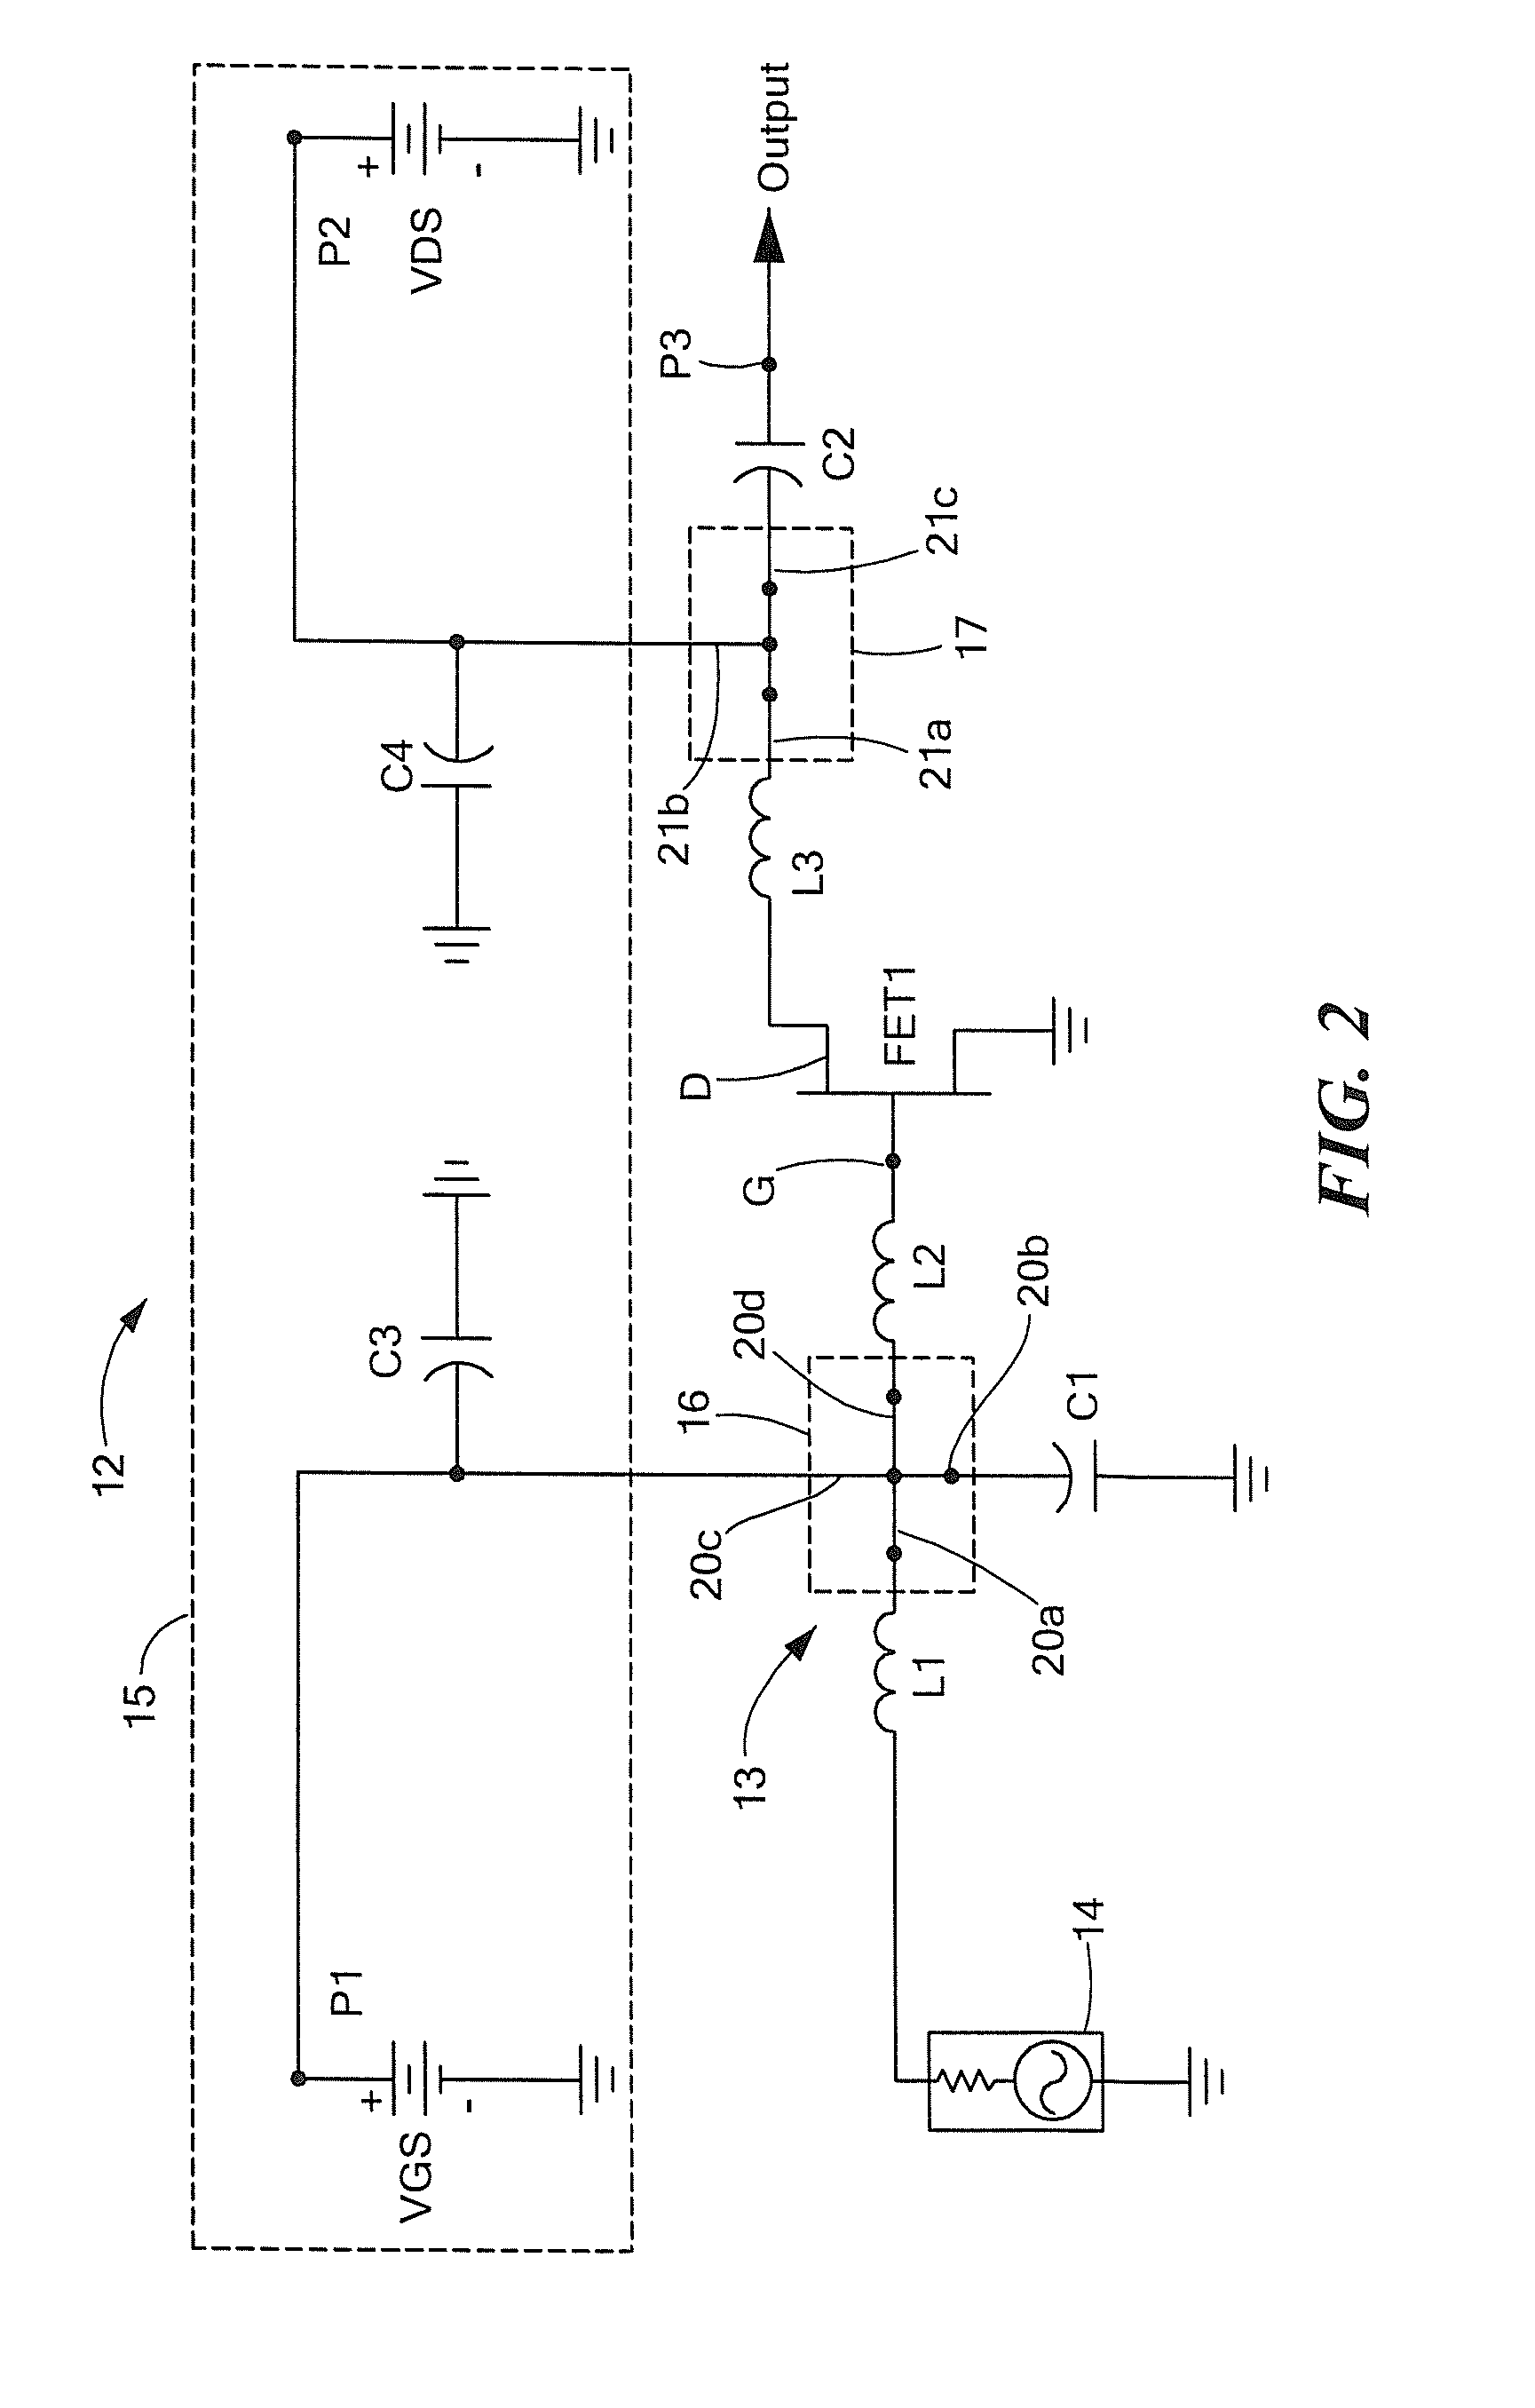 Monolithic microwave integrated circuits (MMICs) having conductor-backed coplanar waveguides and method of designing such MMICs